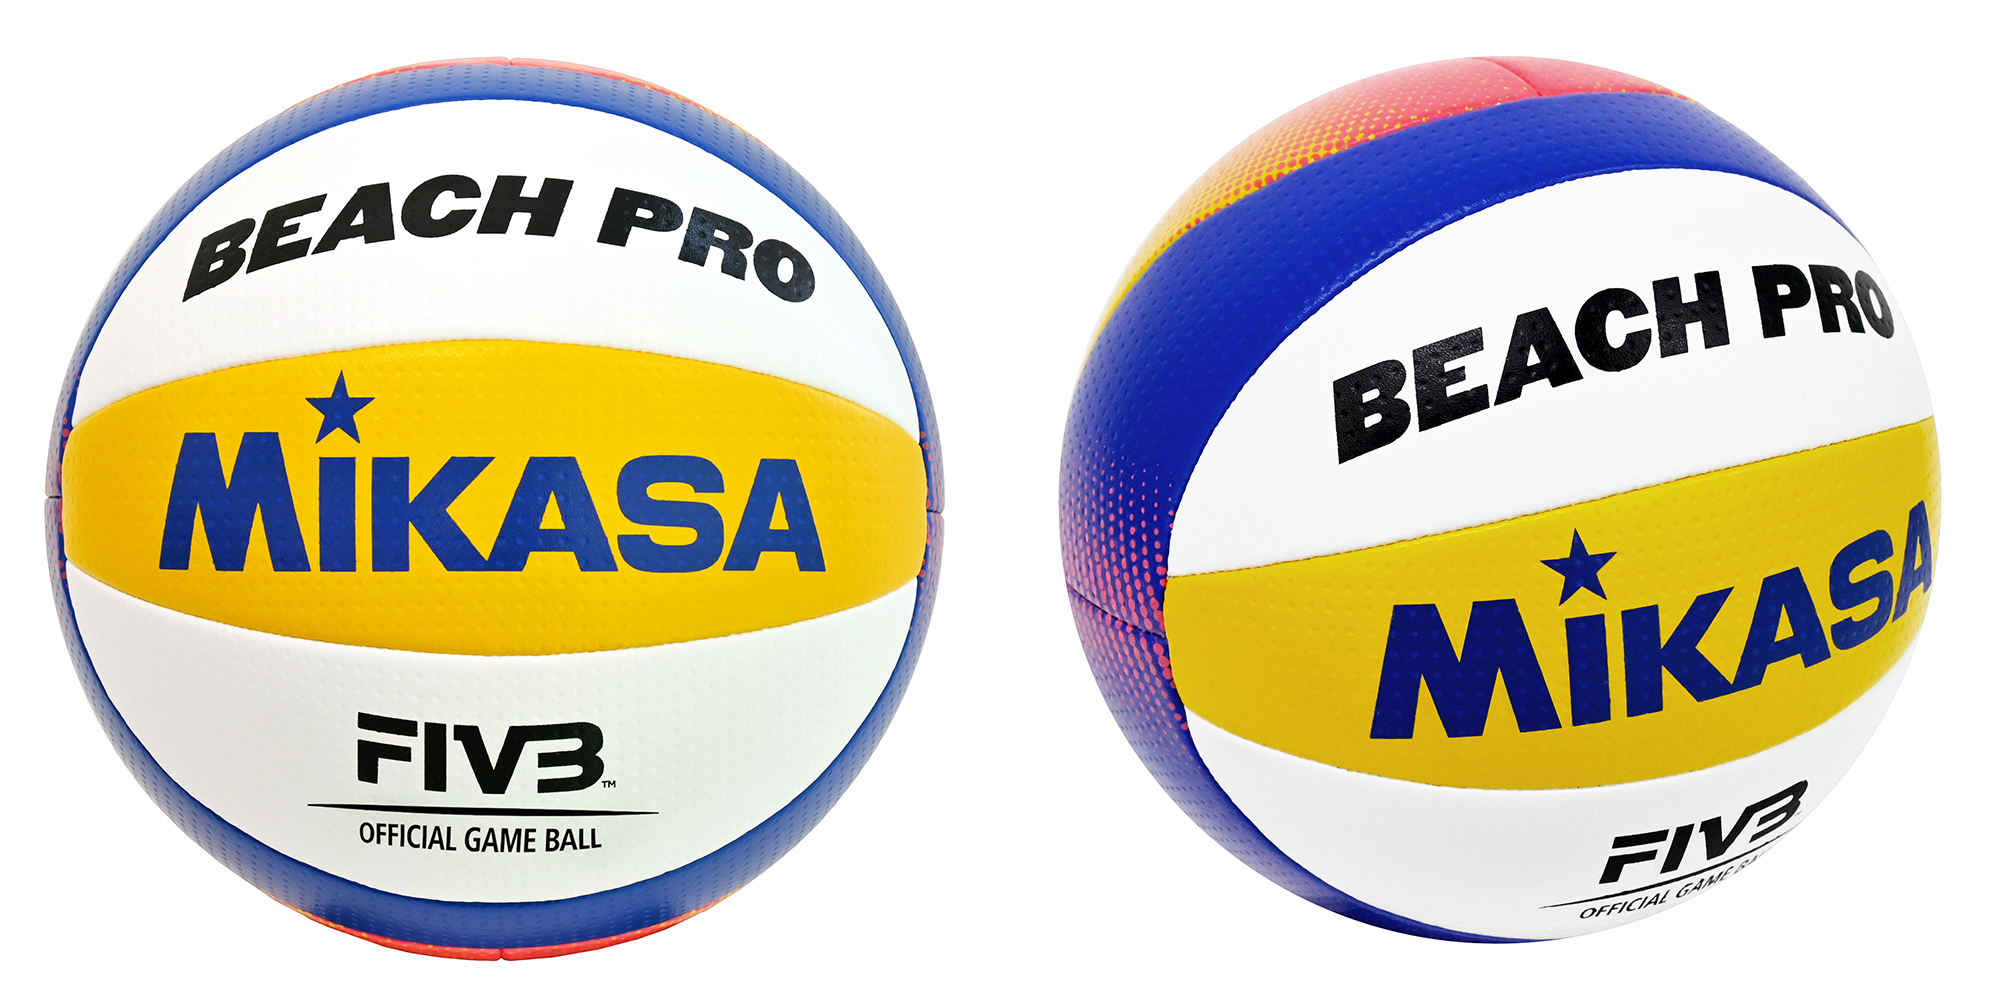 MIKASA launches new beach volleyball at Beach Pro Tour Finals, Historic